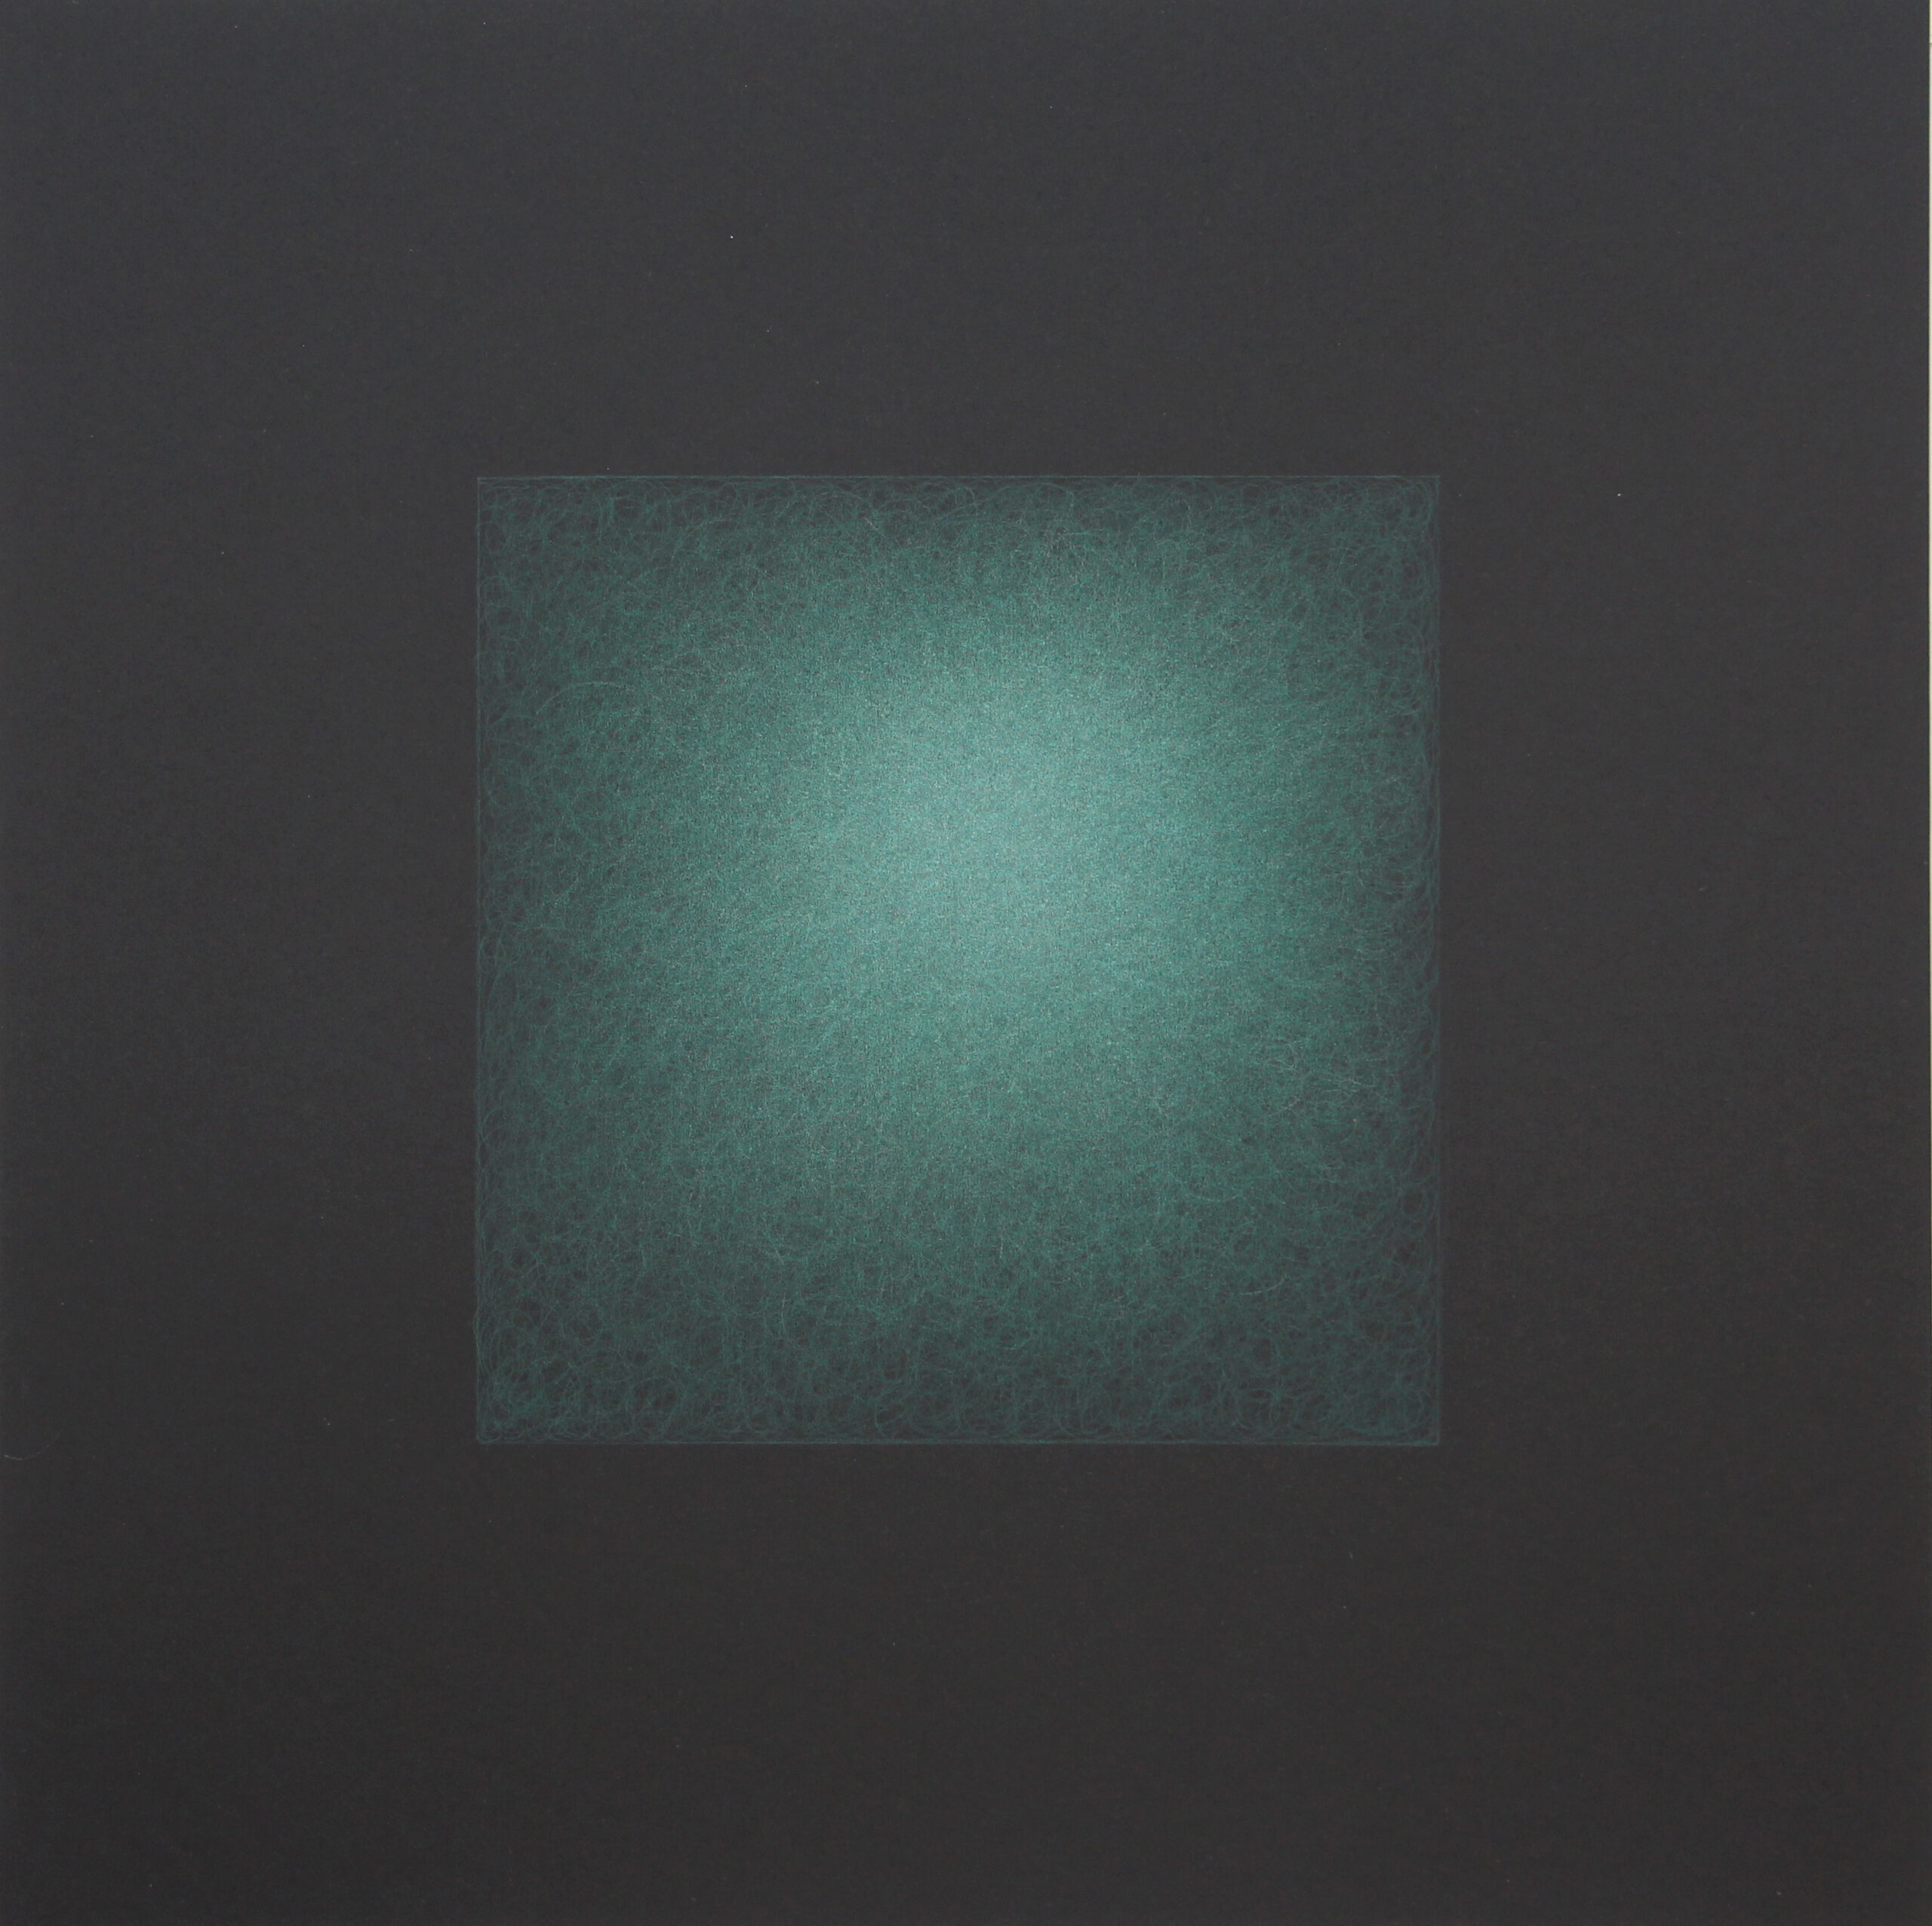 Floating Phthalo Green Square, 2023, colored pencil on black paper, 20 x 20"